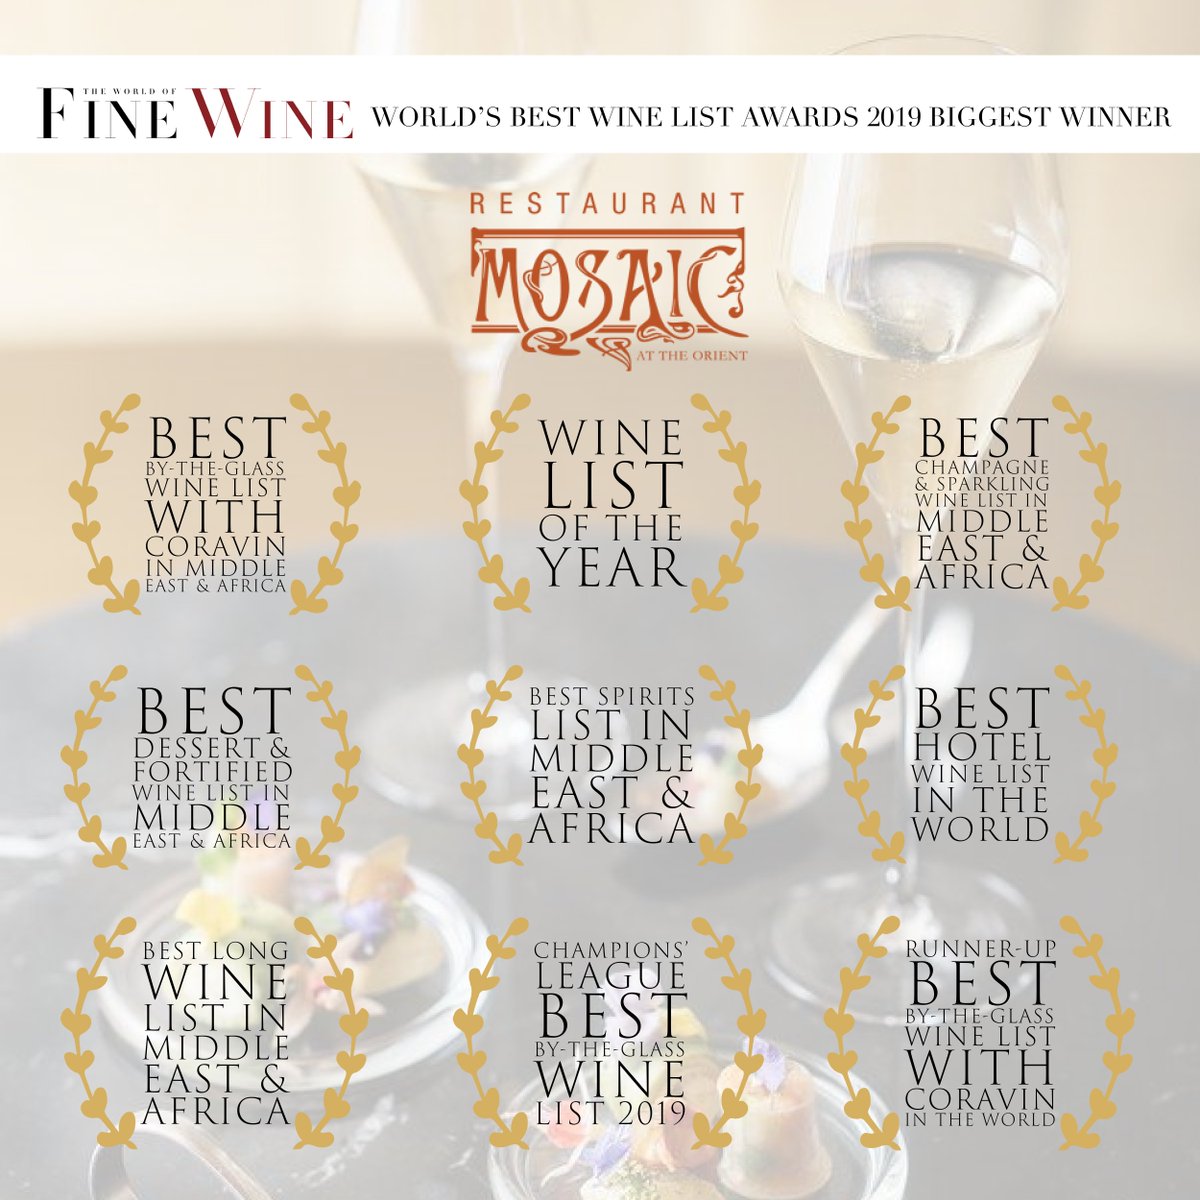 🏆 Restaurant Mosaic at The Orient was the biggest winner of the 2019! Join us November 30th for the virtual award ceremony and find out if your favorite restaurants made this year's winner circle. Register here l8r.it/vy8i @MosaicatOrient #worldoffinewine